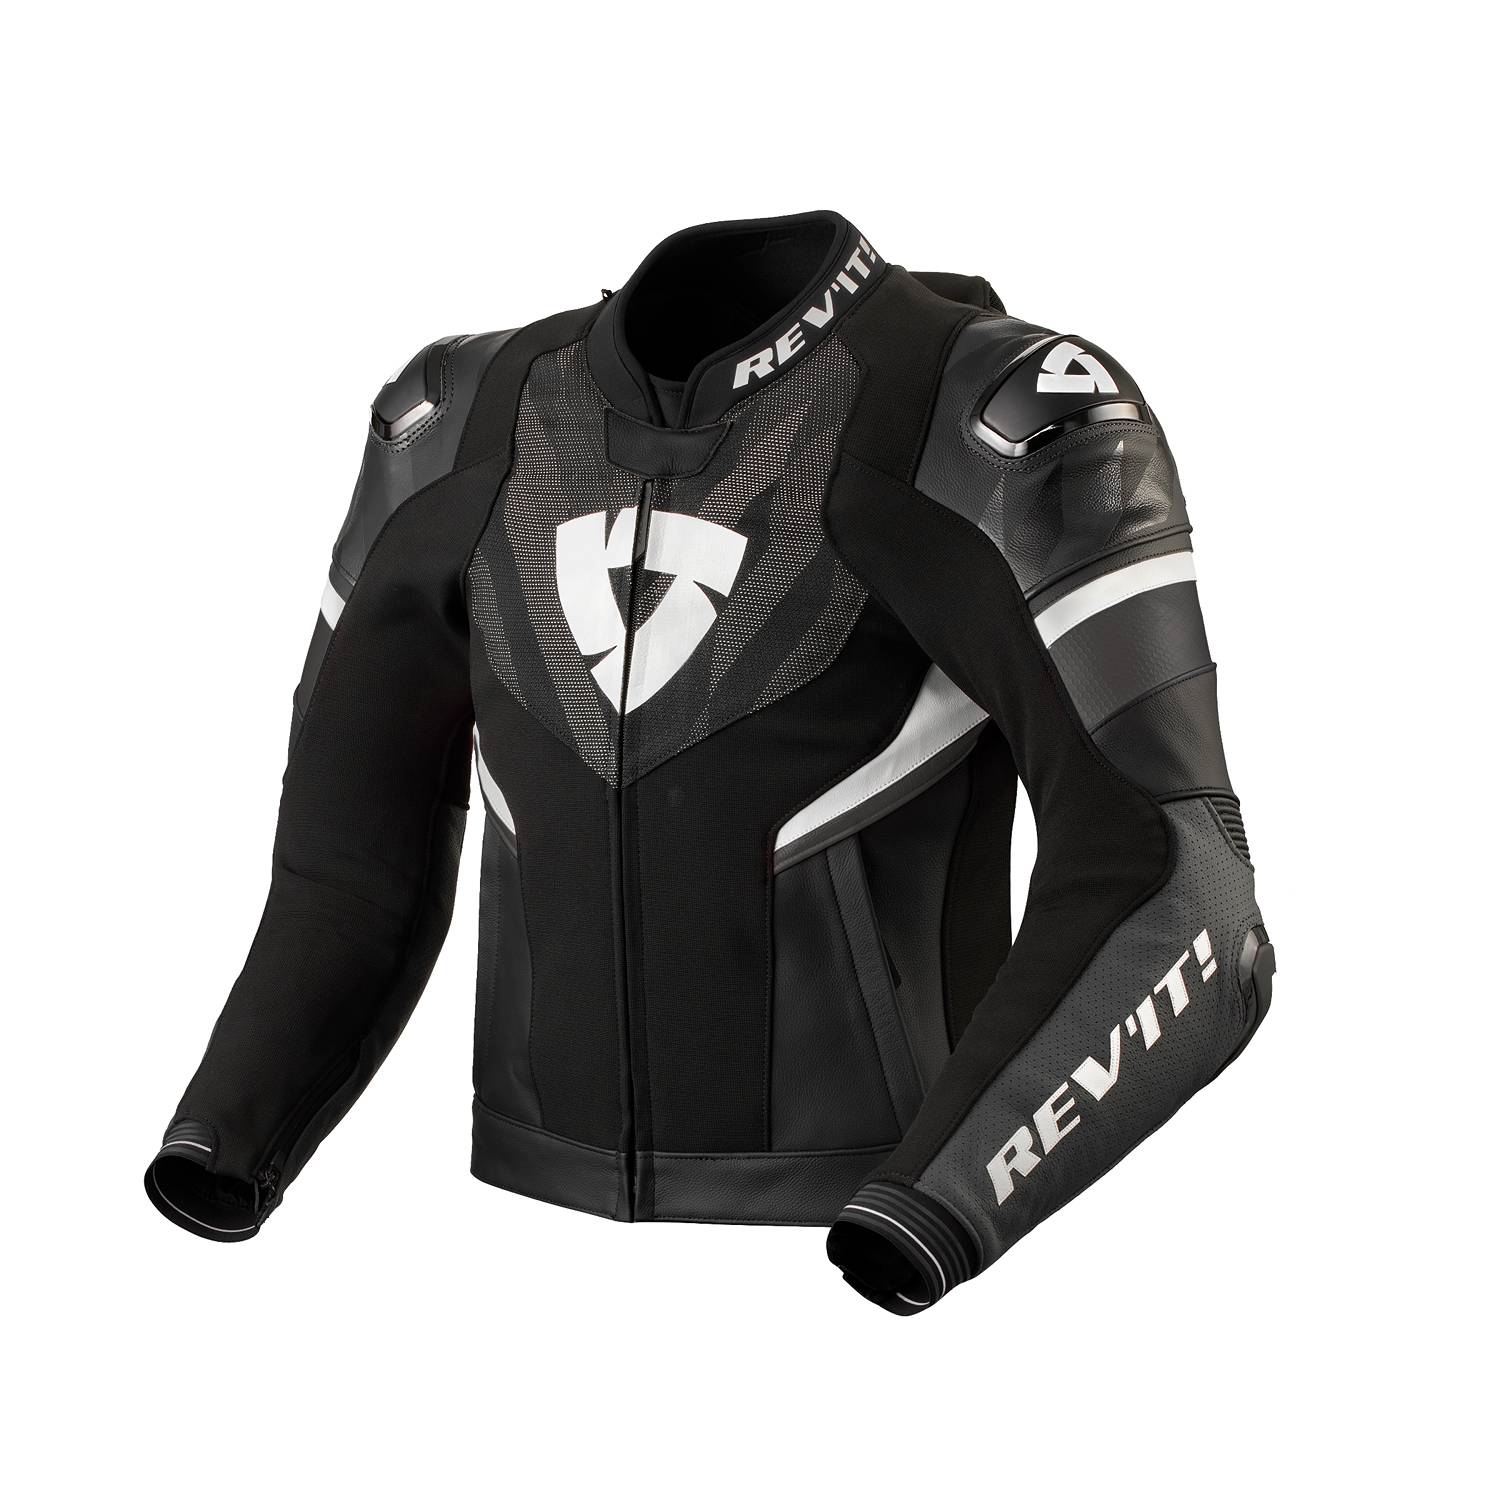 Image of REV'IT! Hyperspeed 2 Pro Jacket Black Anthracite Size 52 ID 8700001358613